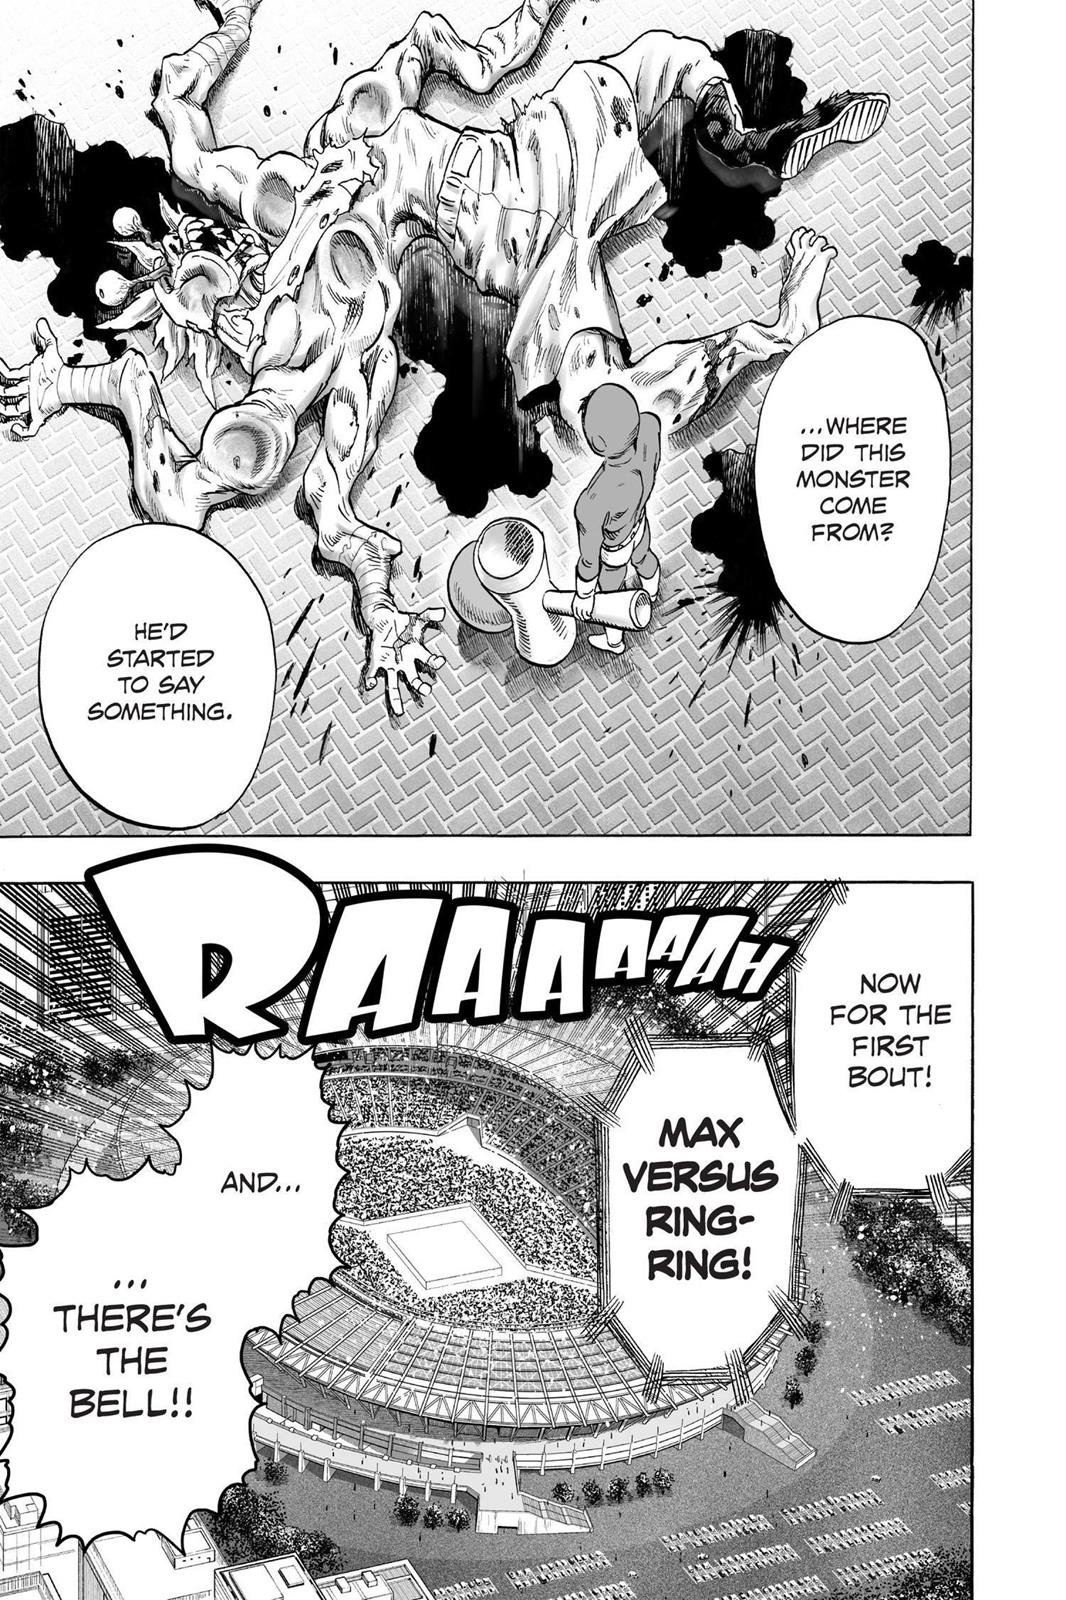 One-Punch Man, Punch 60 image 26